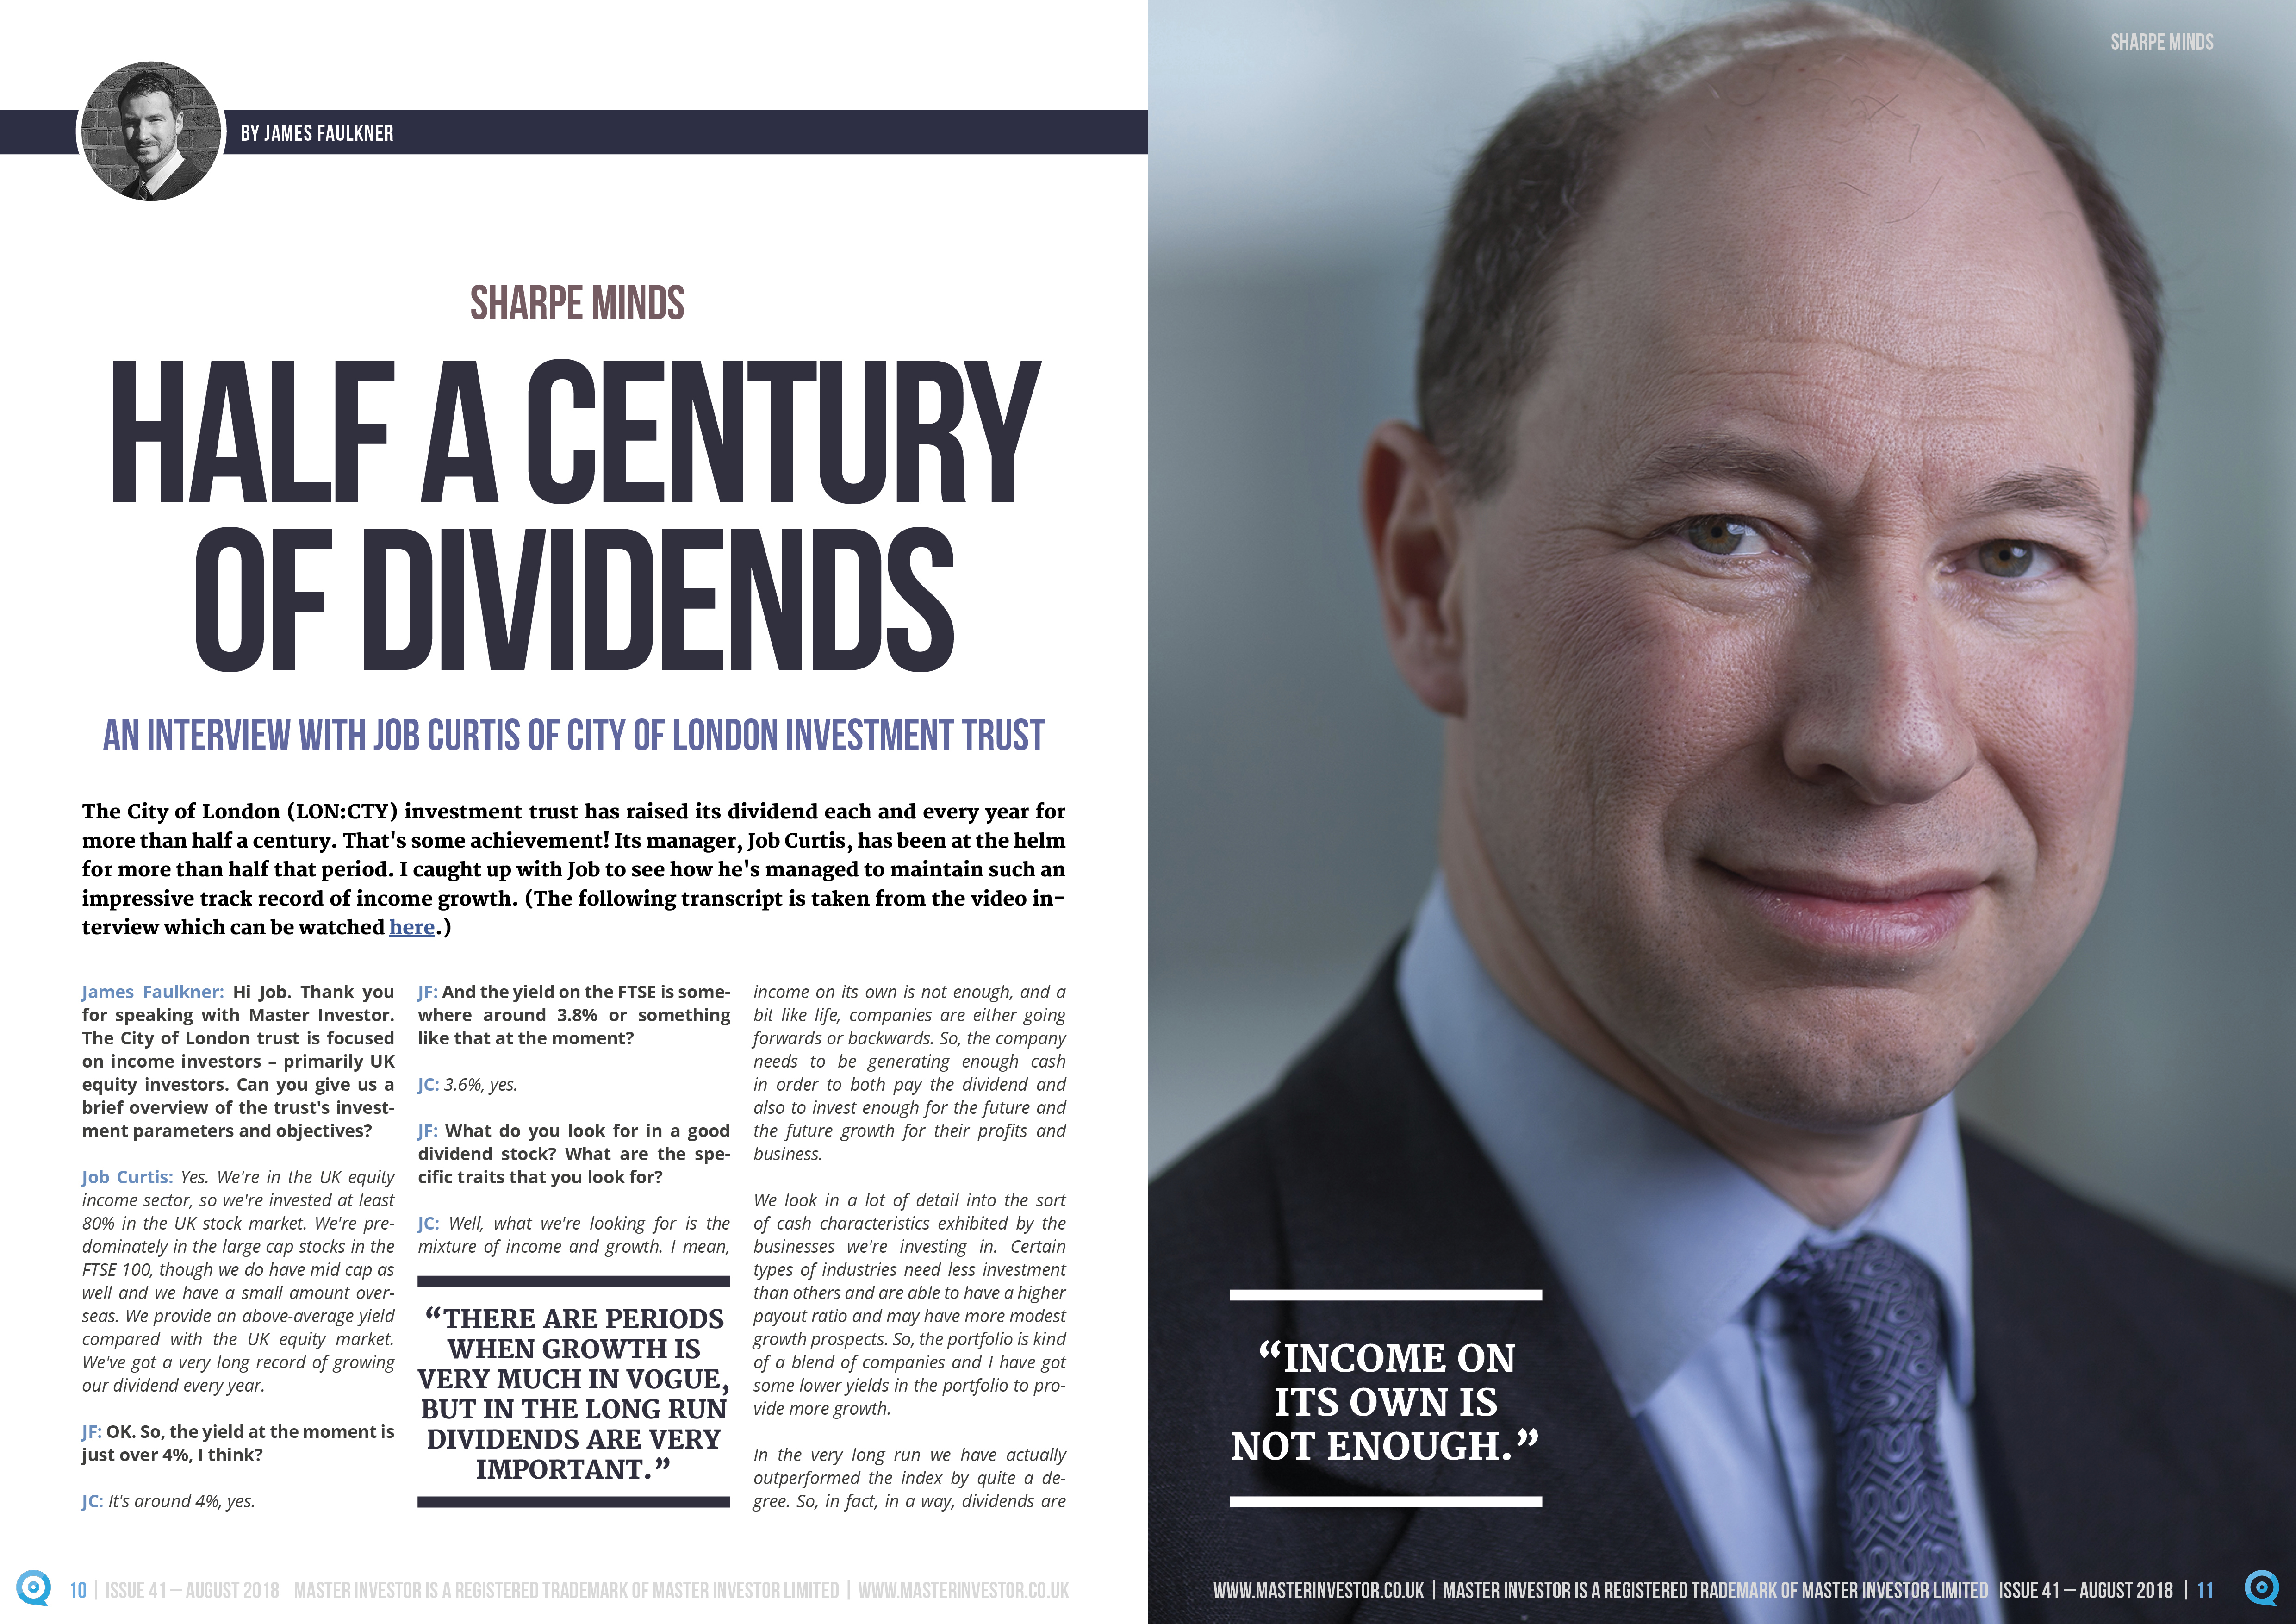 Half a century of dividends